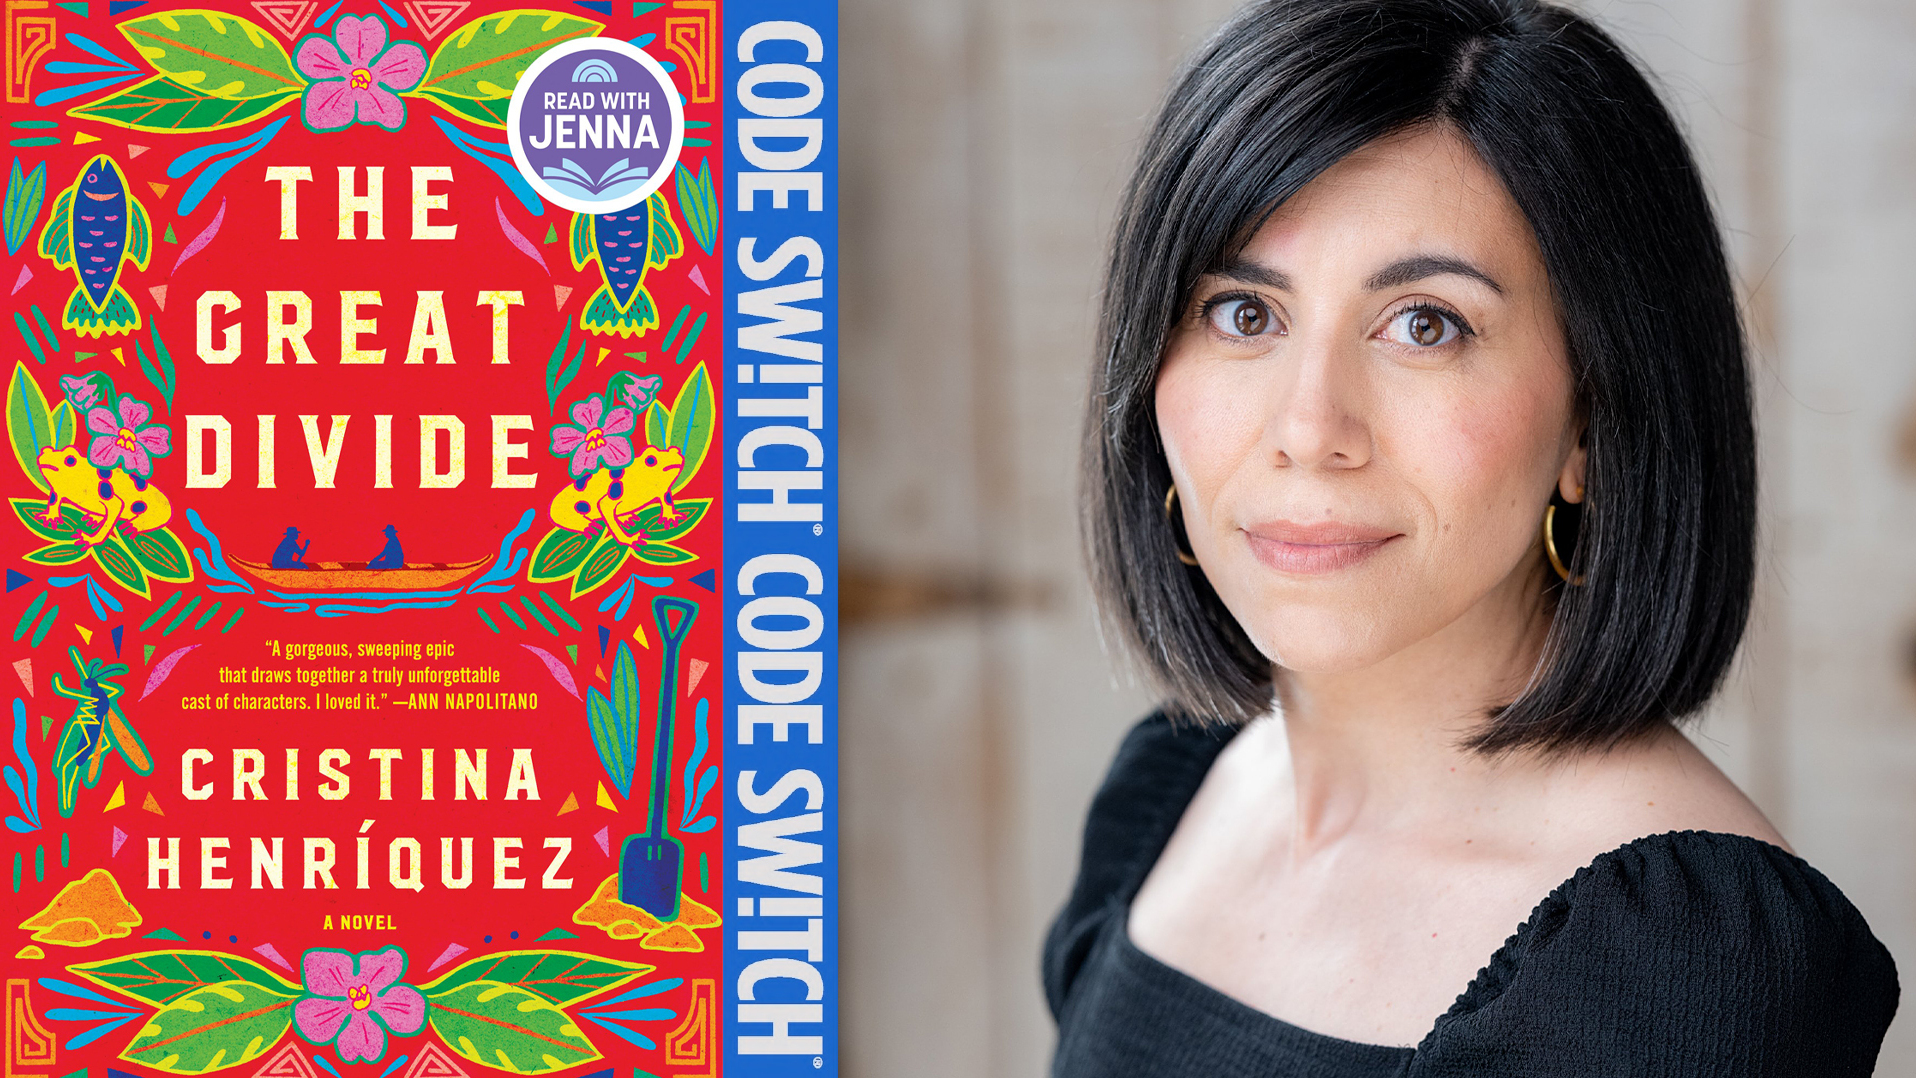 Author Cristina Henriquez next to the cover of her new novel, <em>The Great Divide.</em>‘/></p>\n<p>The Panama Canal has been dubbed the greatest engineering feat in human history. It’s also (perhaps less favorably) been called the greatest liberty mankind has ever taken with Mother Nature. But due to climate change, the Canal is drying up and fewer than half of the ships that used to pass through are now able to do so. So how did we get here? Today on the show, we’re talking to Cristina Henriquez, the author of a new novel that explores the making of the Canal. It took 50,000 people from 90 different countries to carve the land in two \u2014 and the consequences of that extraordinary, nature-defying act are still echoing through our present.</p>\n<p><img src=